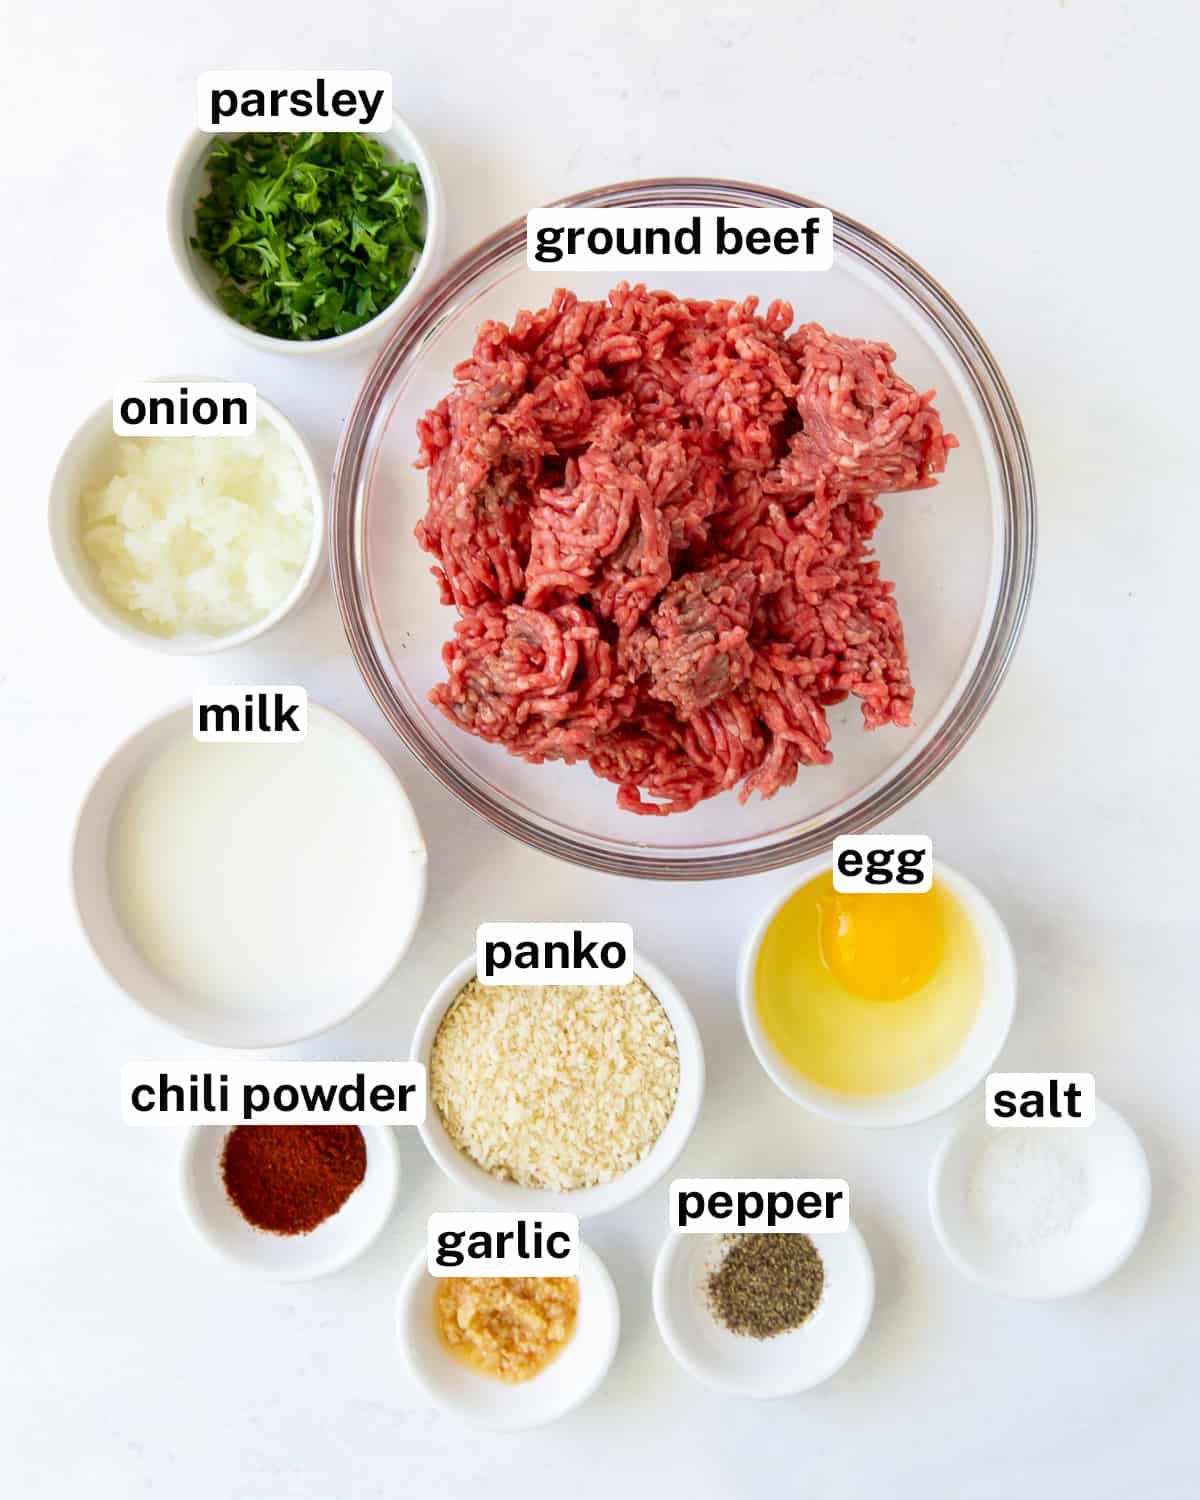 The ingredients for BBQ Meatballs with text.